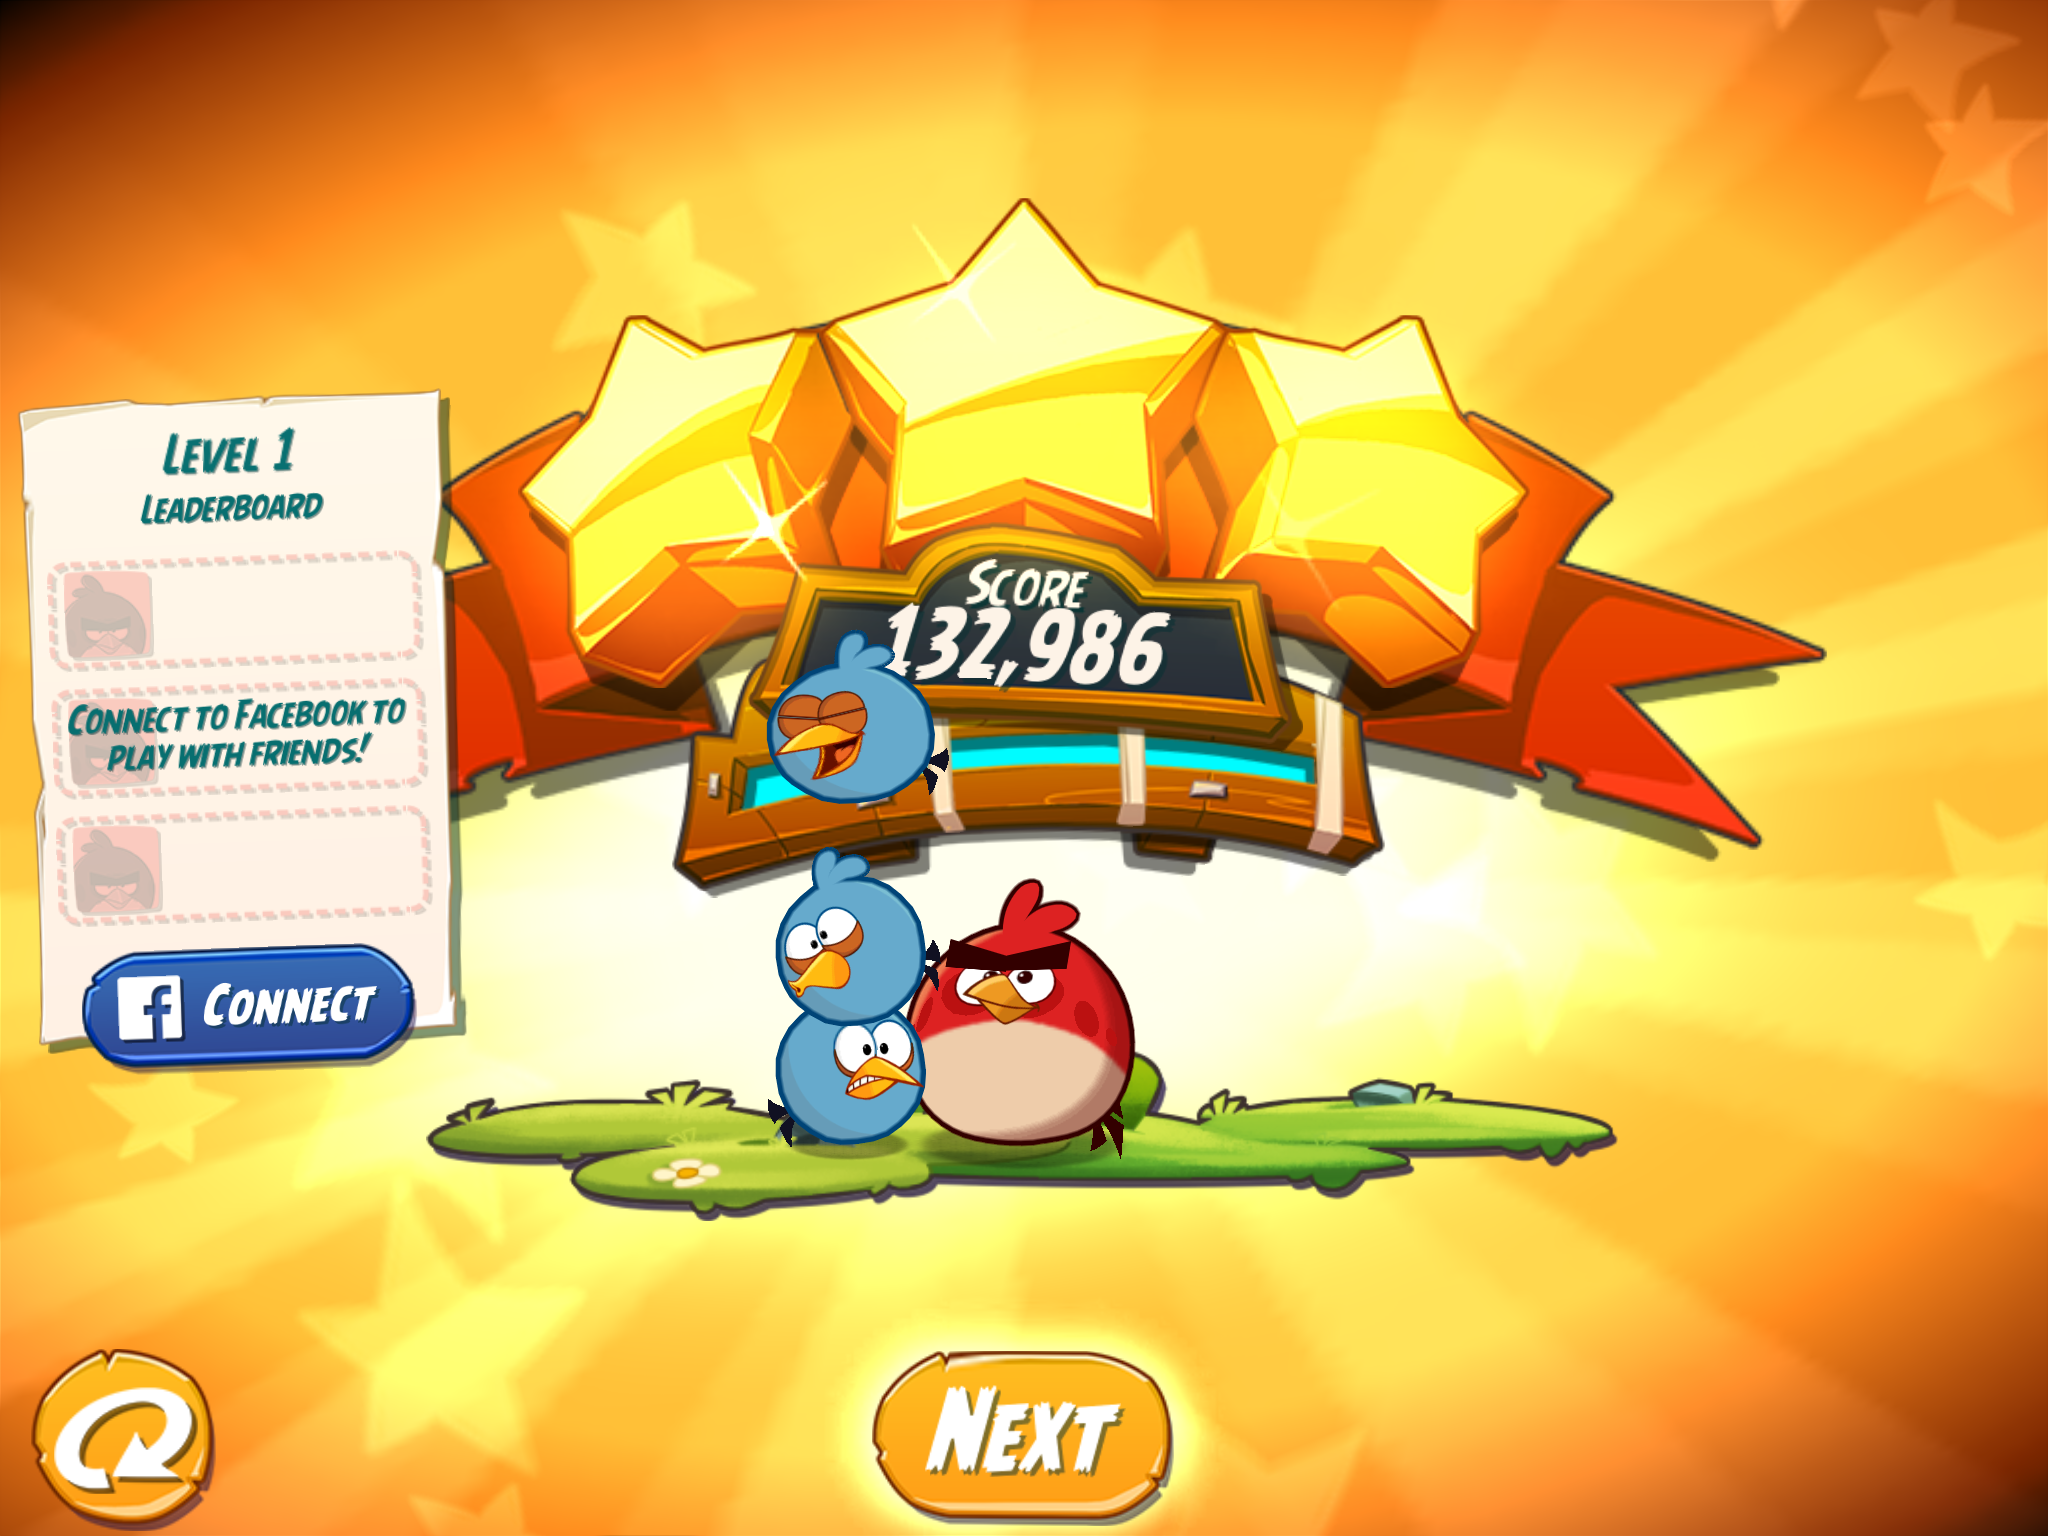 Spindy12: Angry Birds 2: Level 1 (iOS) 132,986 points on 2016-12-20 14:59:12